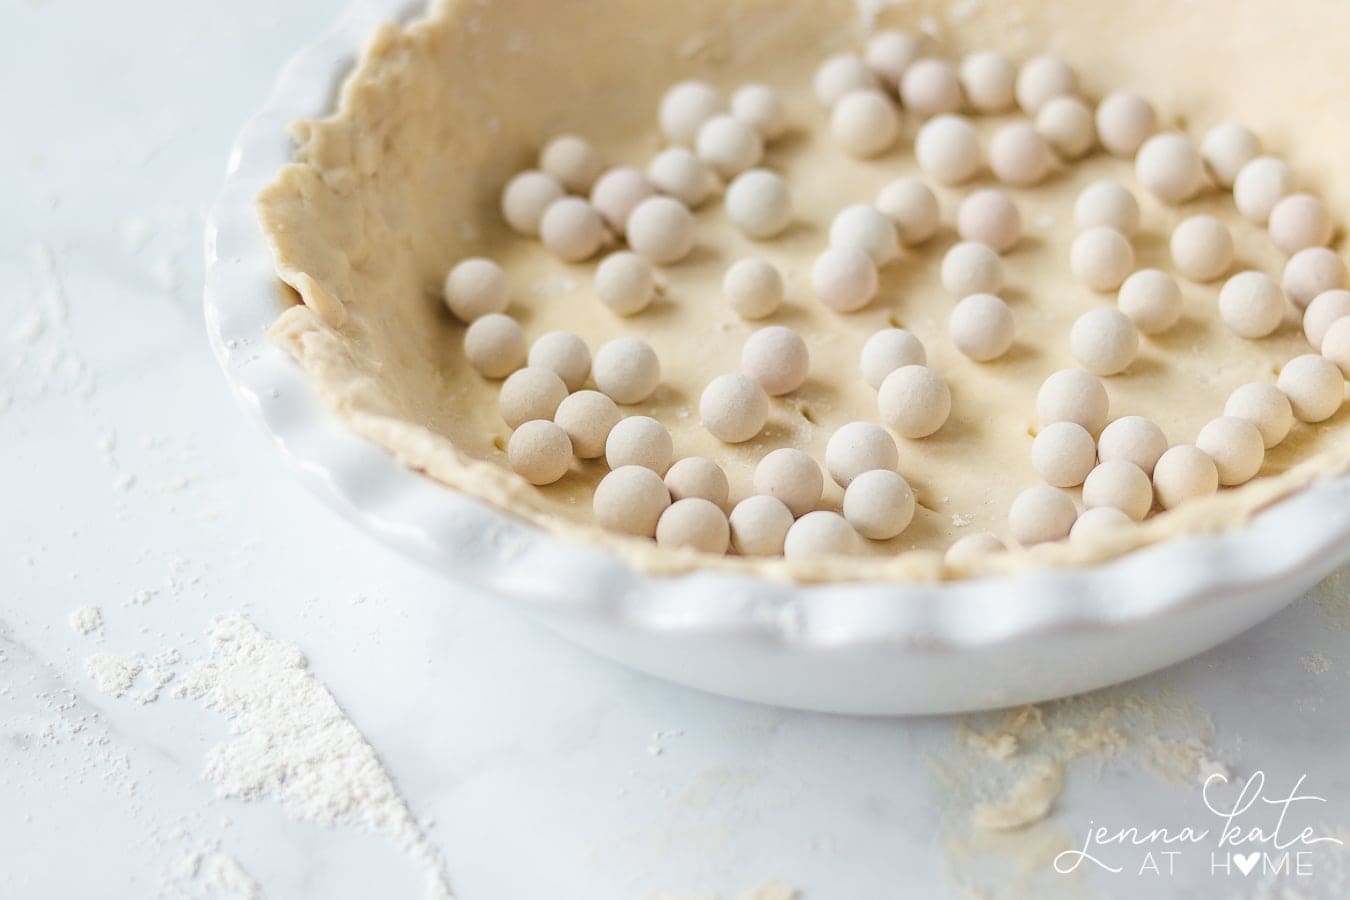 baking beads in unbaked pie shell